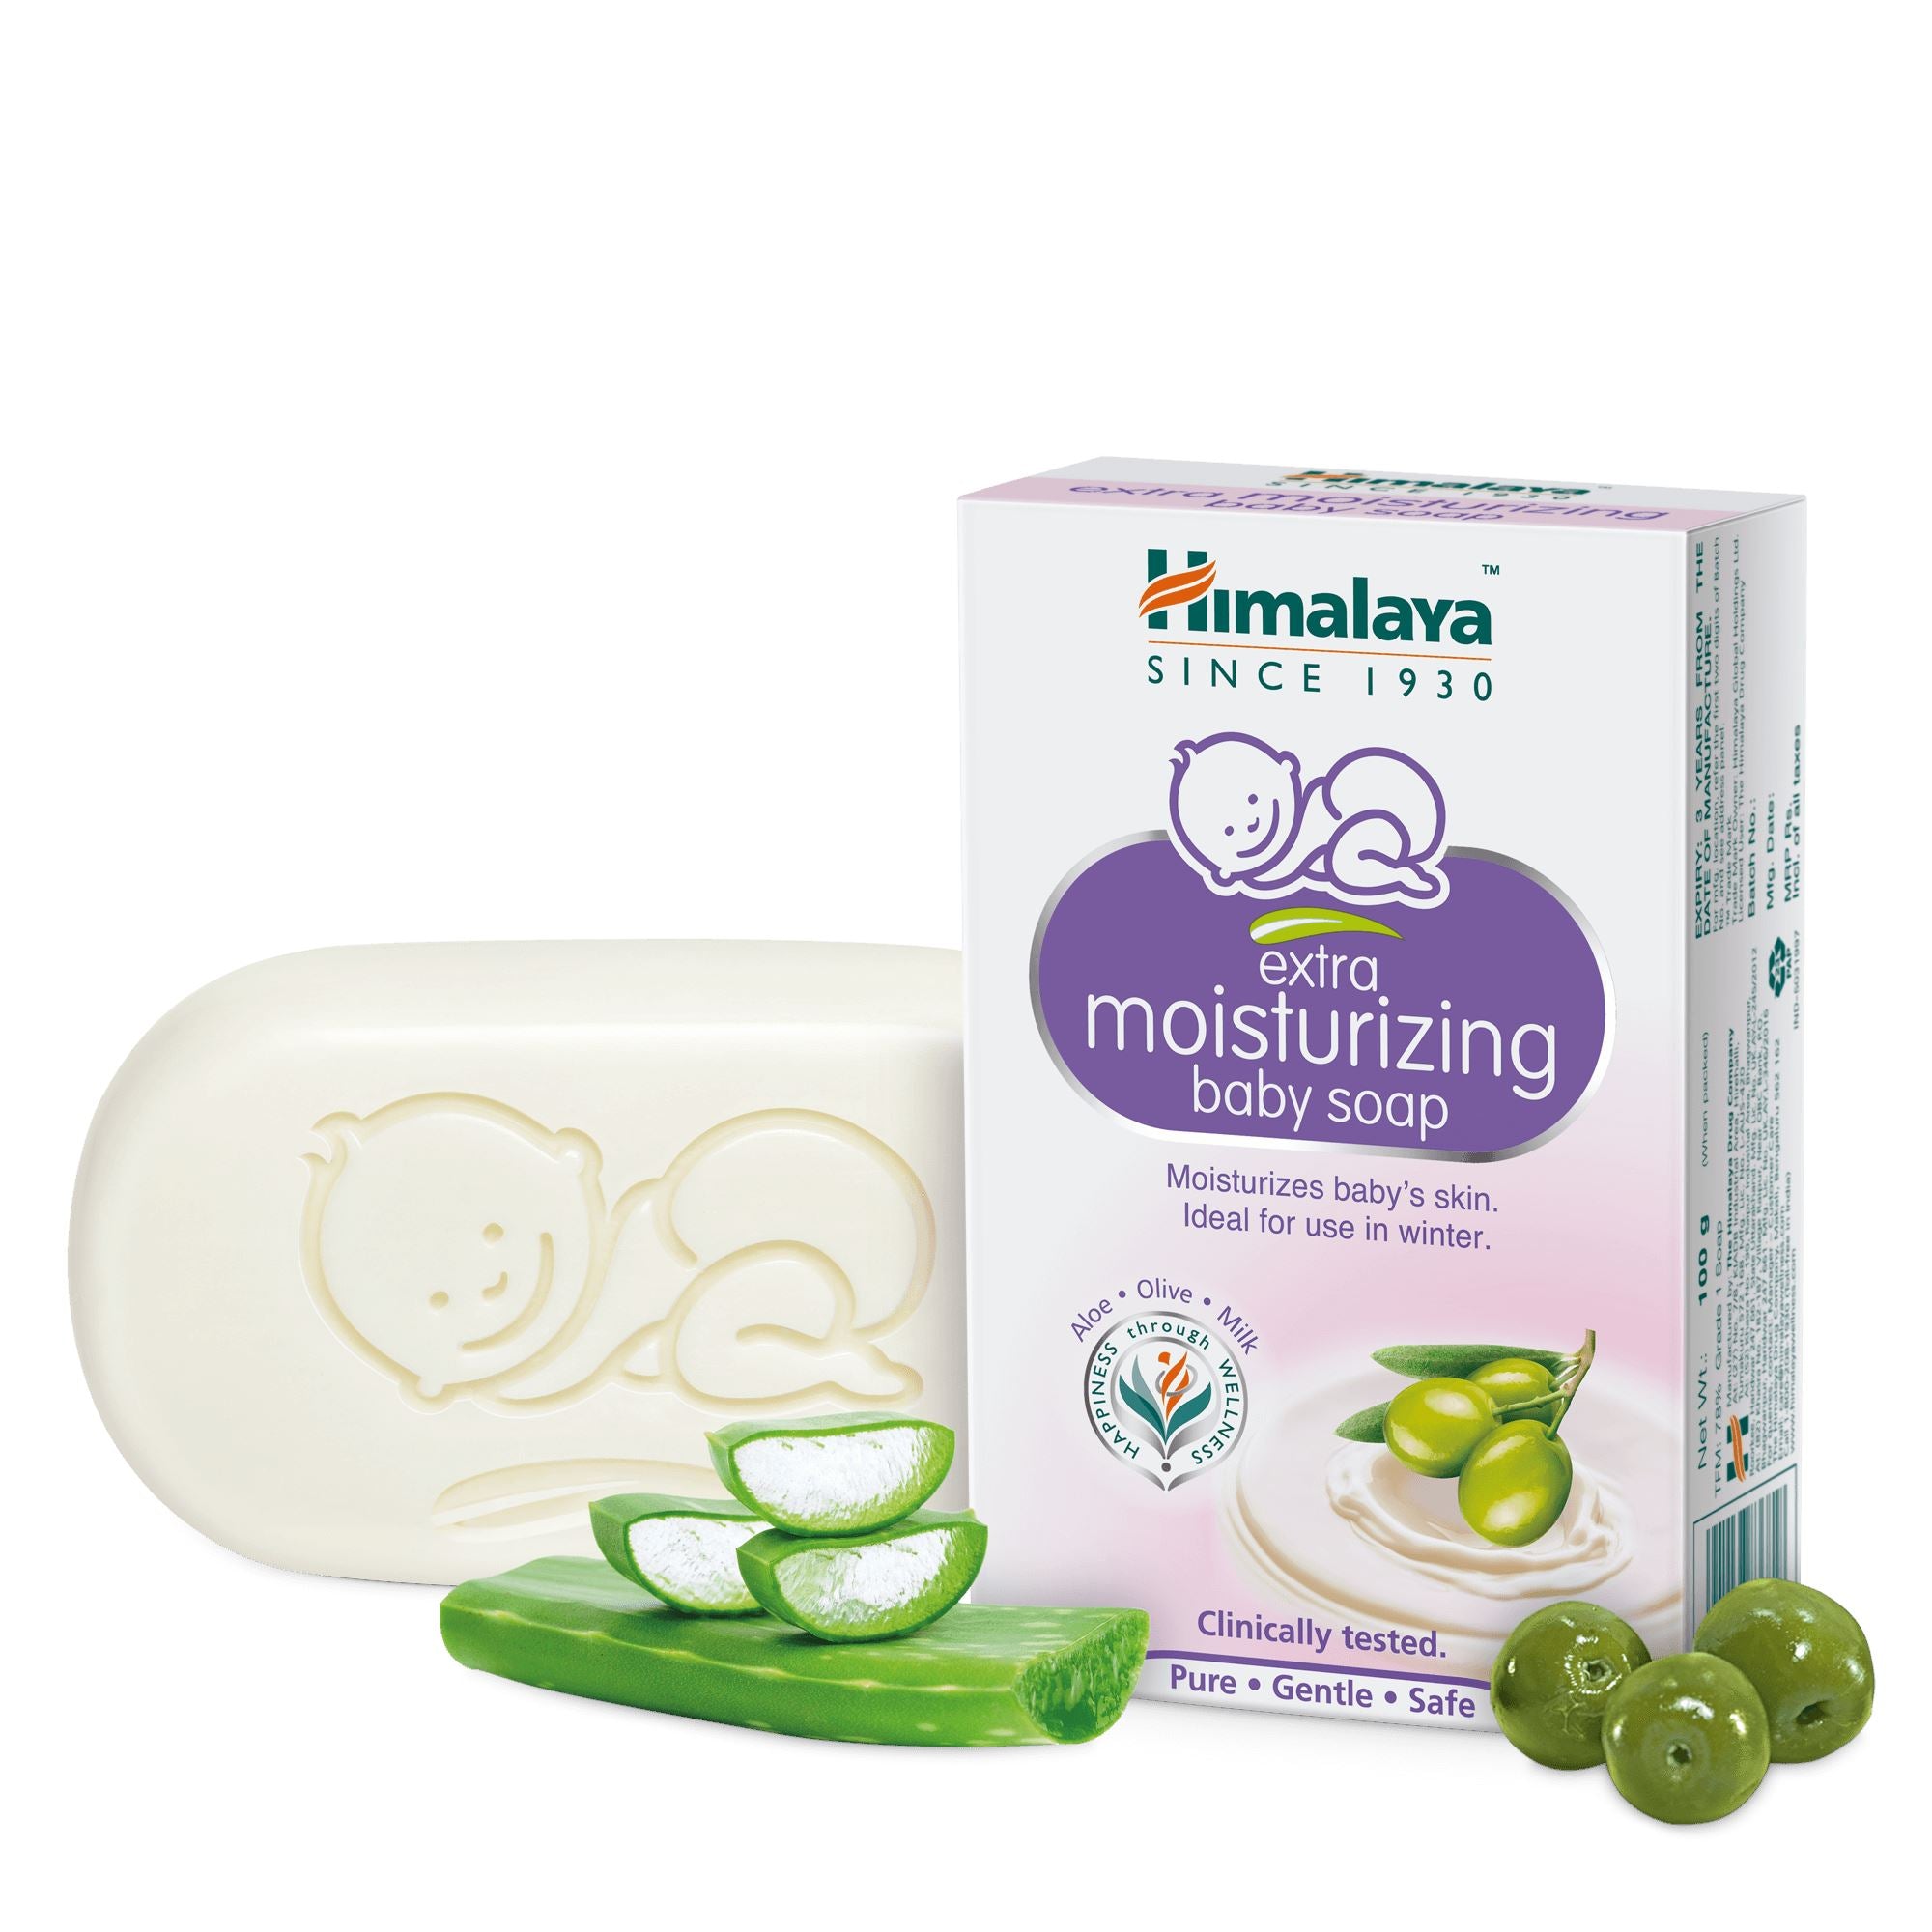 Himalaya extra moisturizing baby soap 100g- Gently cleanses without causing post-bath dryness